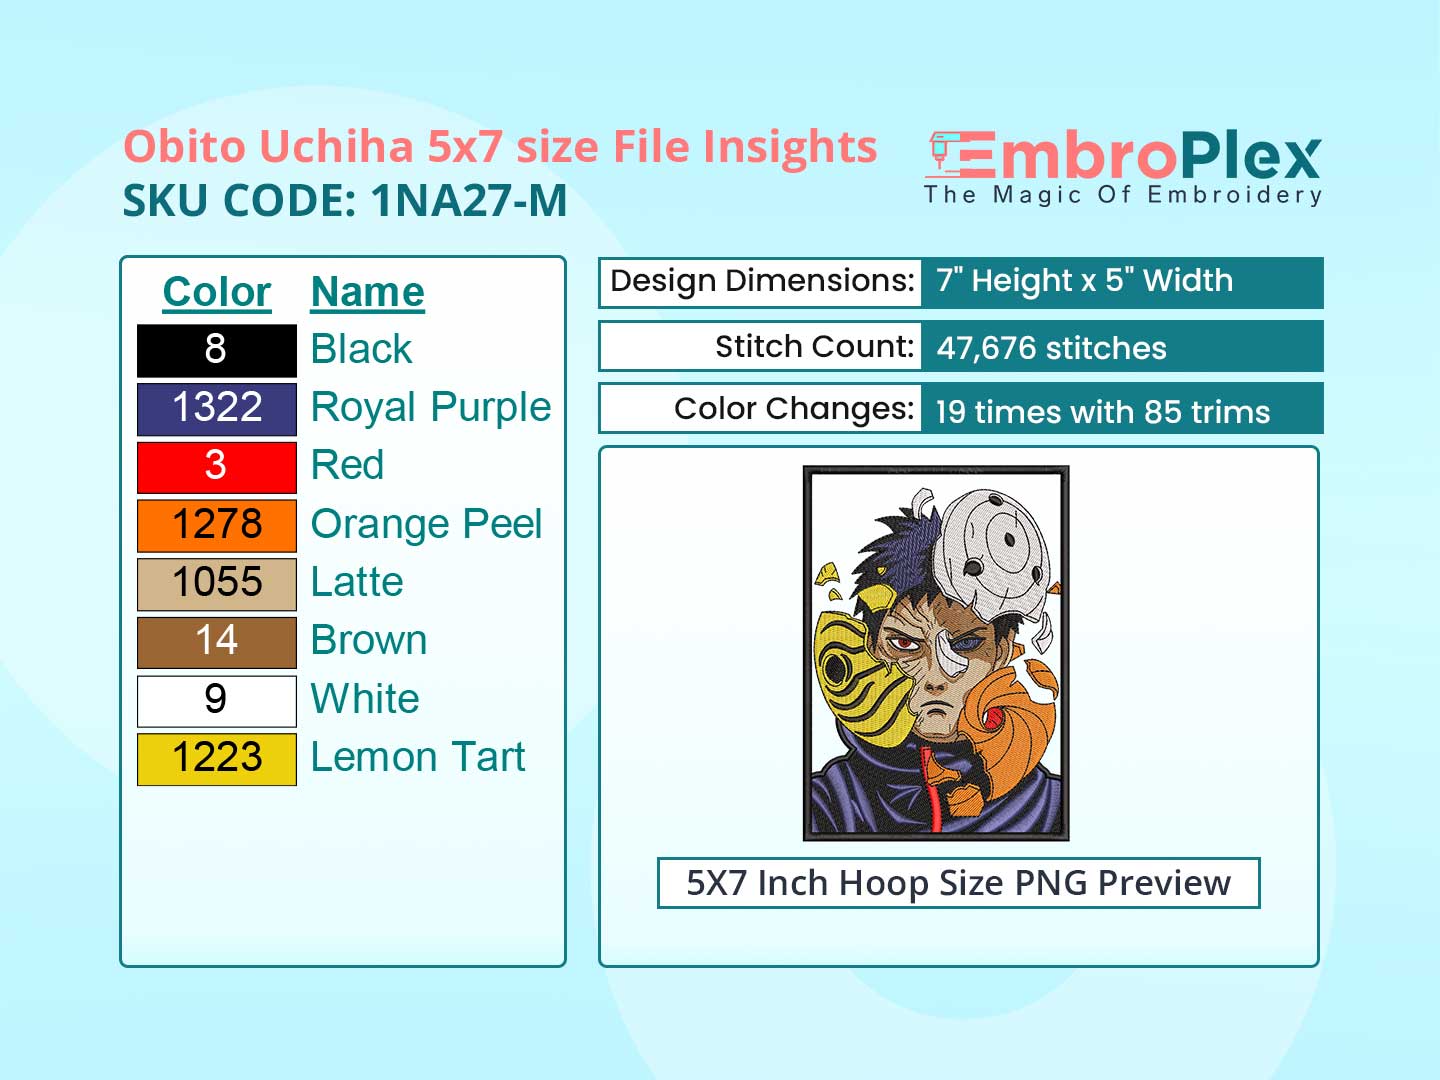 Anime-Inspired Obito Uchiha Embroidery Design File - 5x7 Inch hoop Size Variation overview image